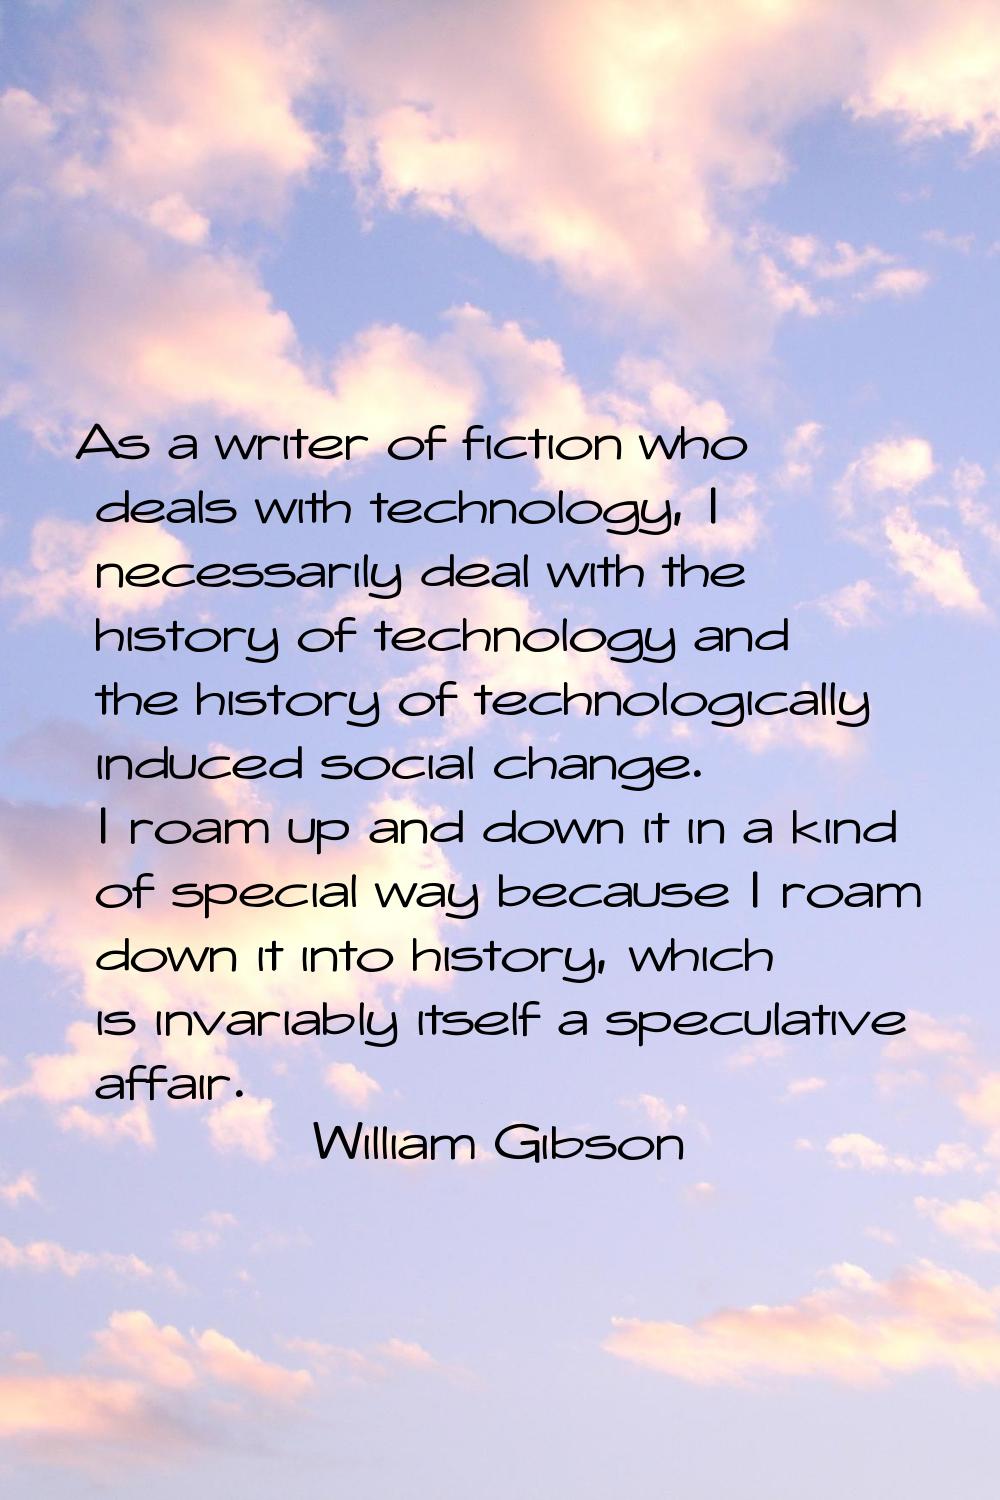 As a writer of fiction who deals with technology, I necessarily deal with the history of technology